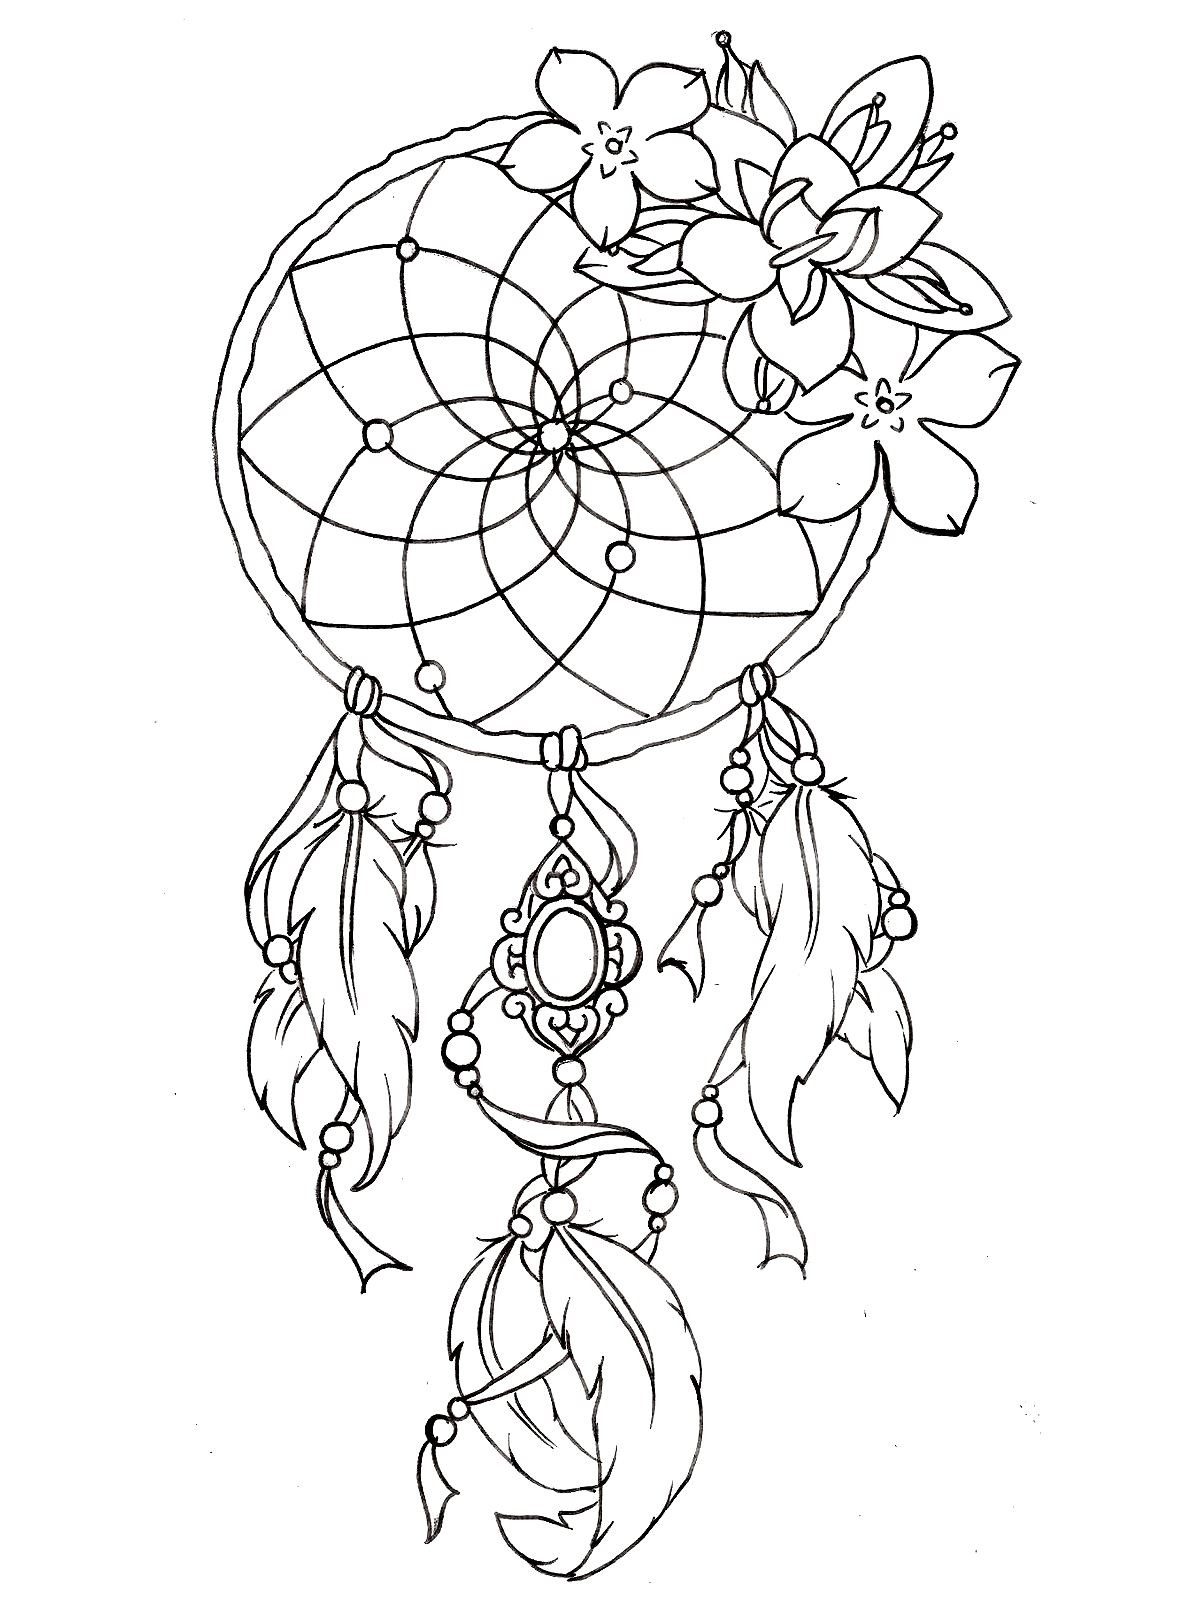 Tattoo Coloring Pages Printable
 Dreamcatcher tattoo designs Tattoos Adult Coloring Pages